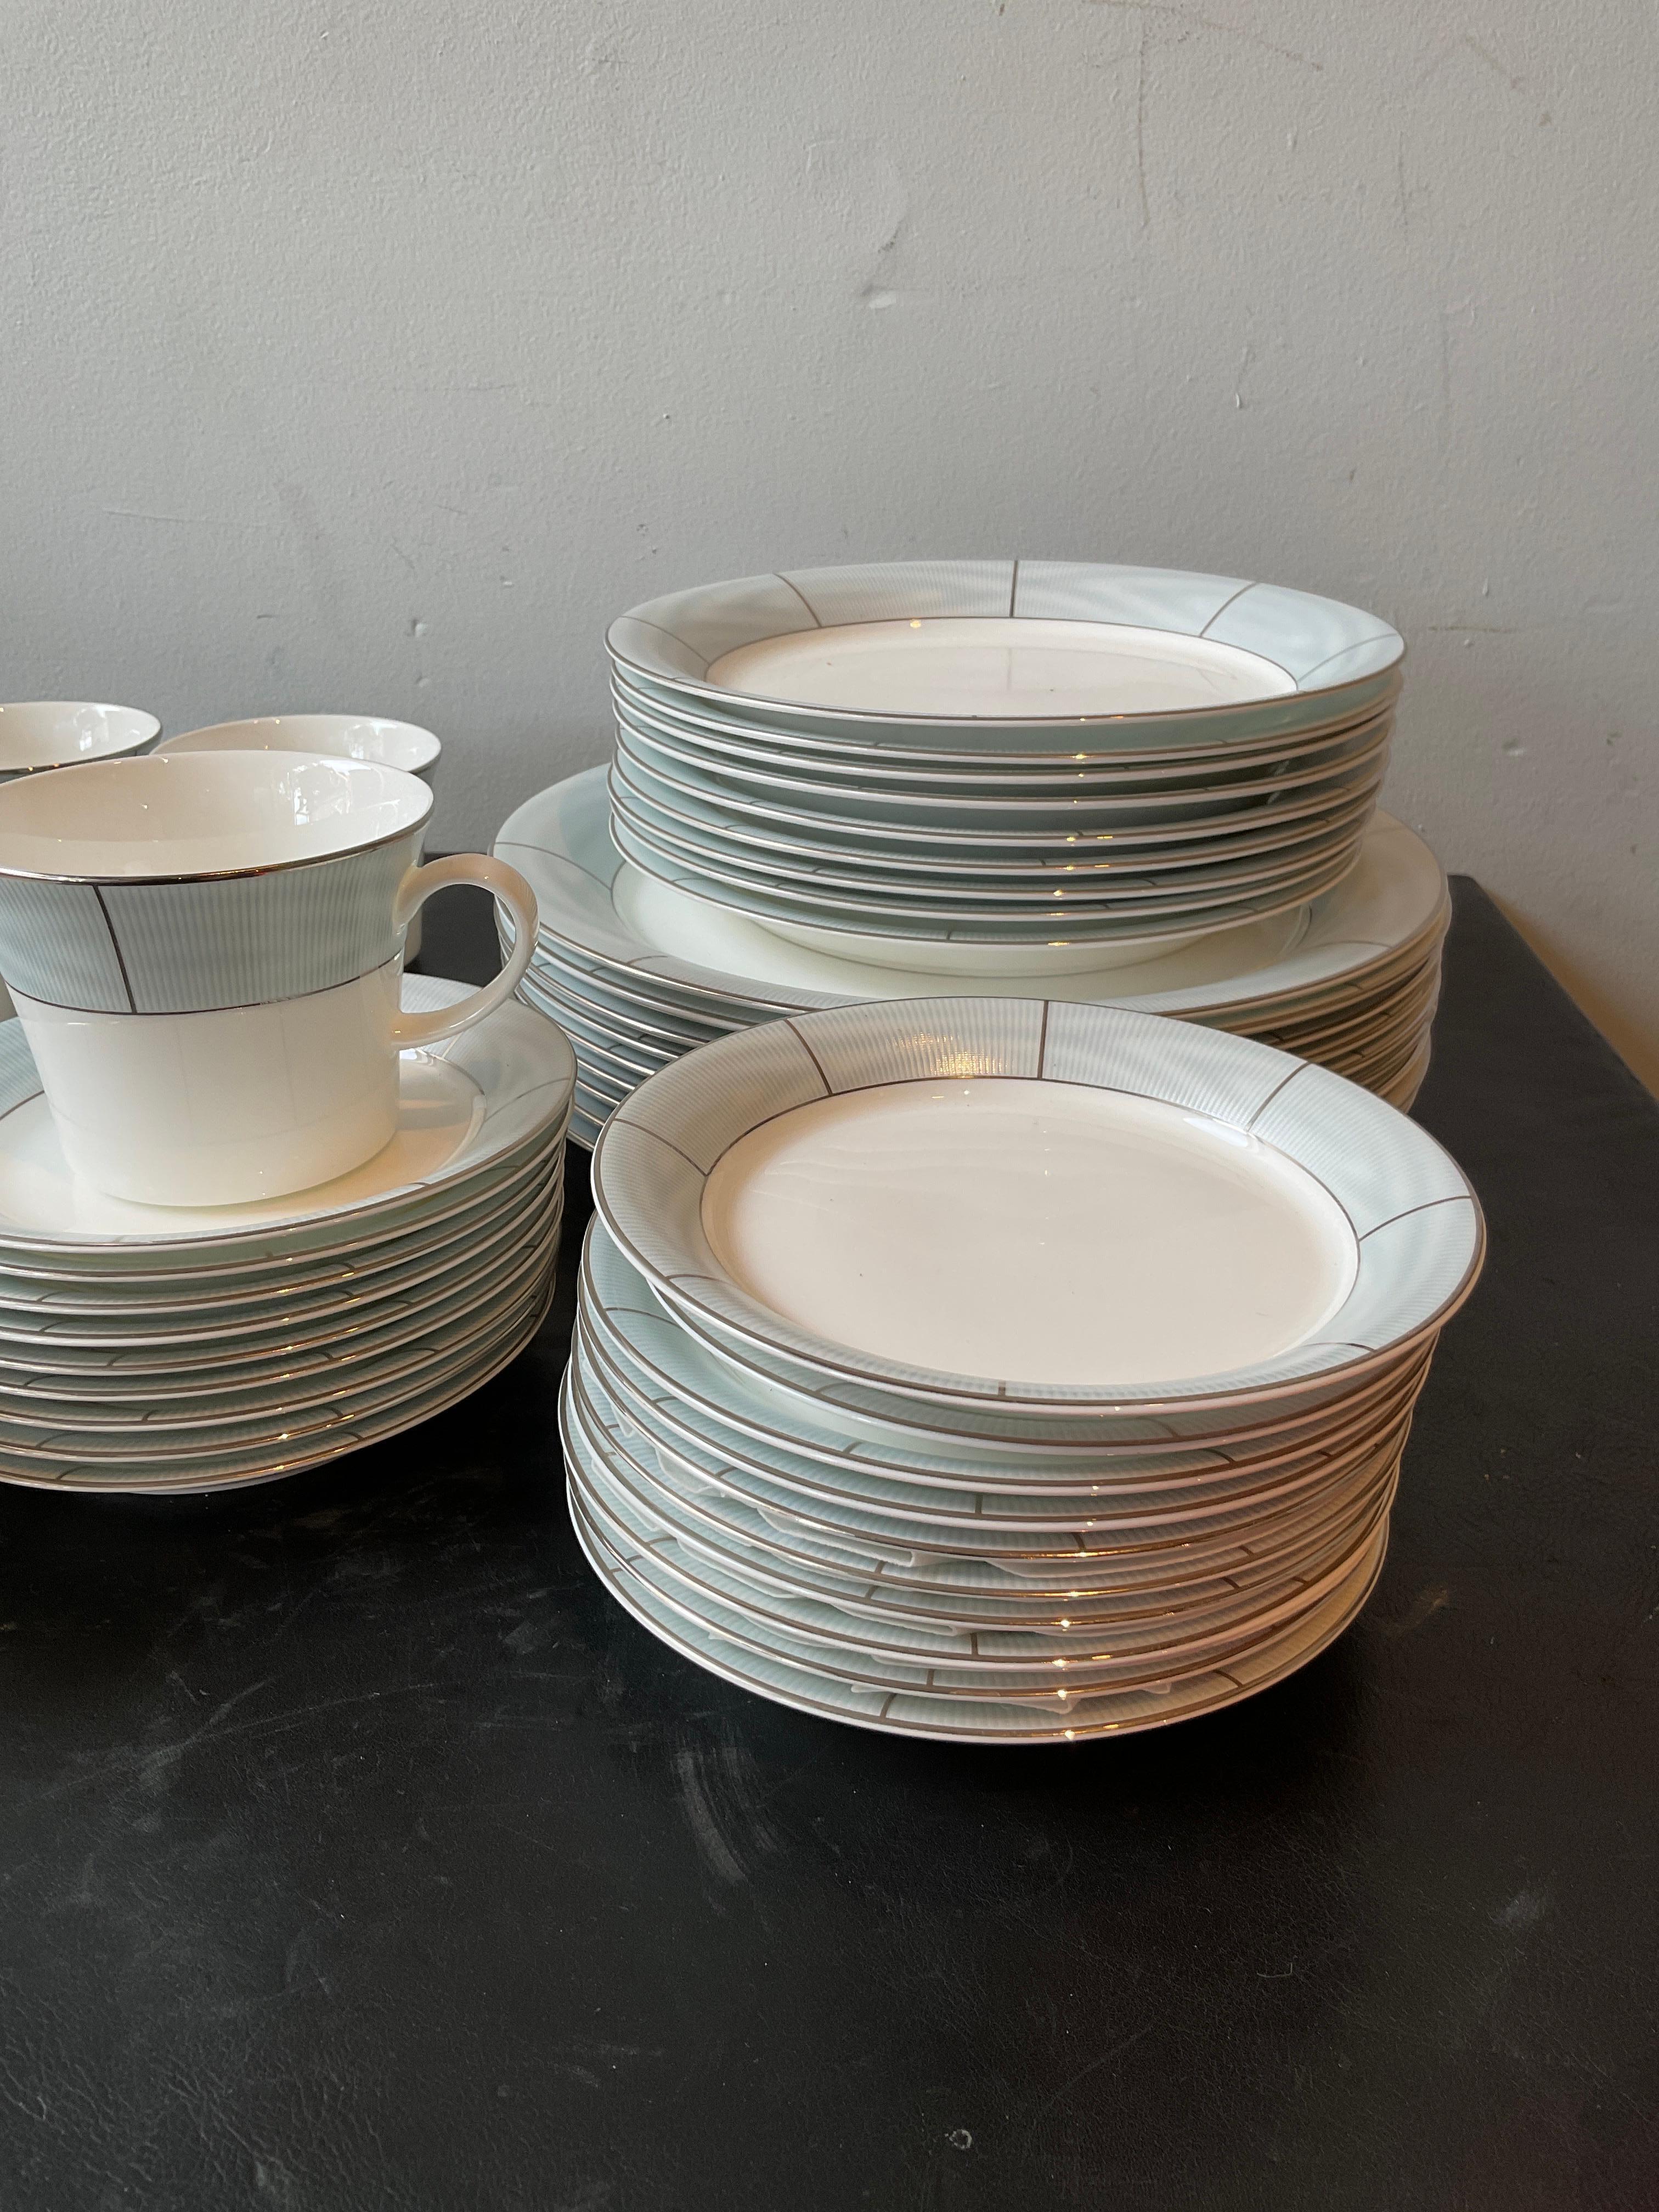 9 Dinner plates
9 Salad plates
9 Bread and butter plates
10 Saucers
7 Cups